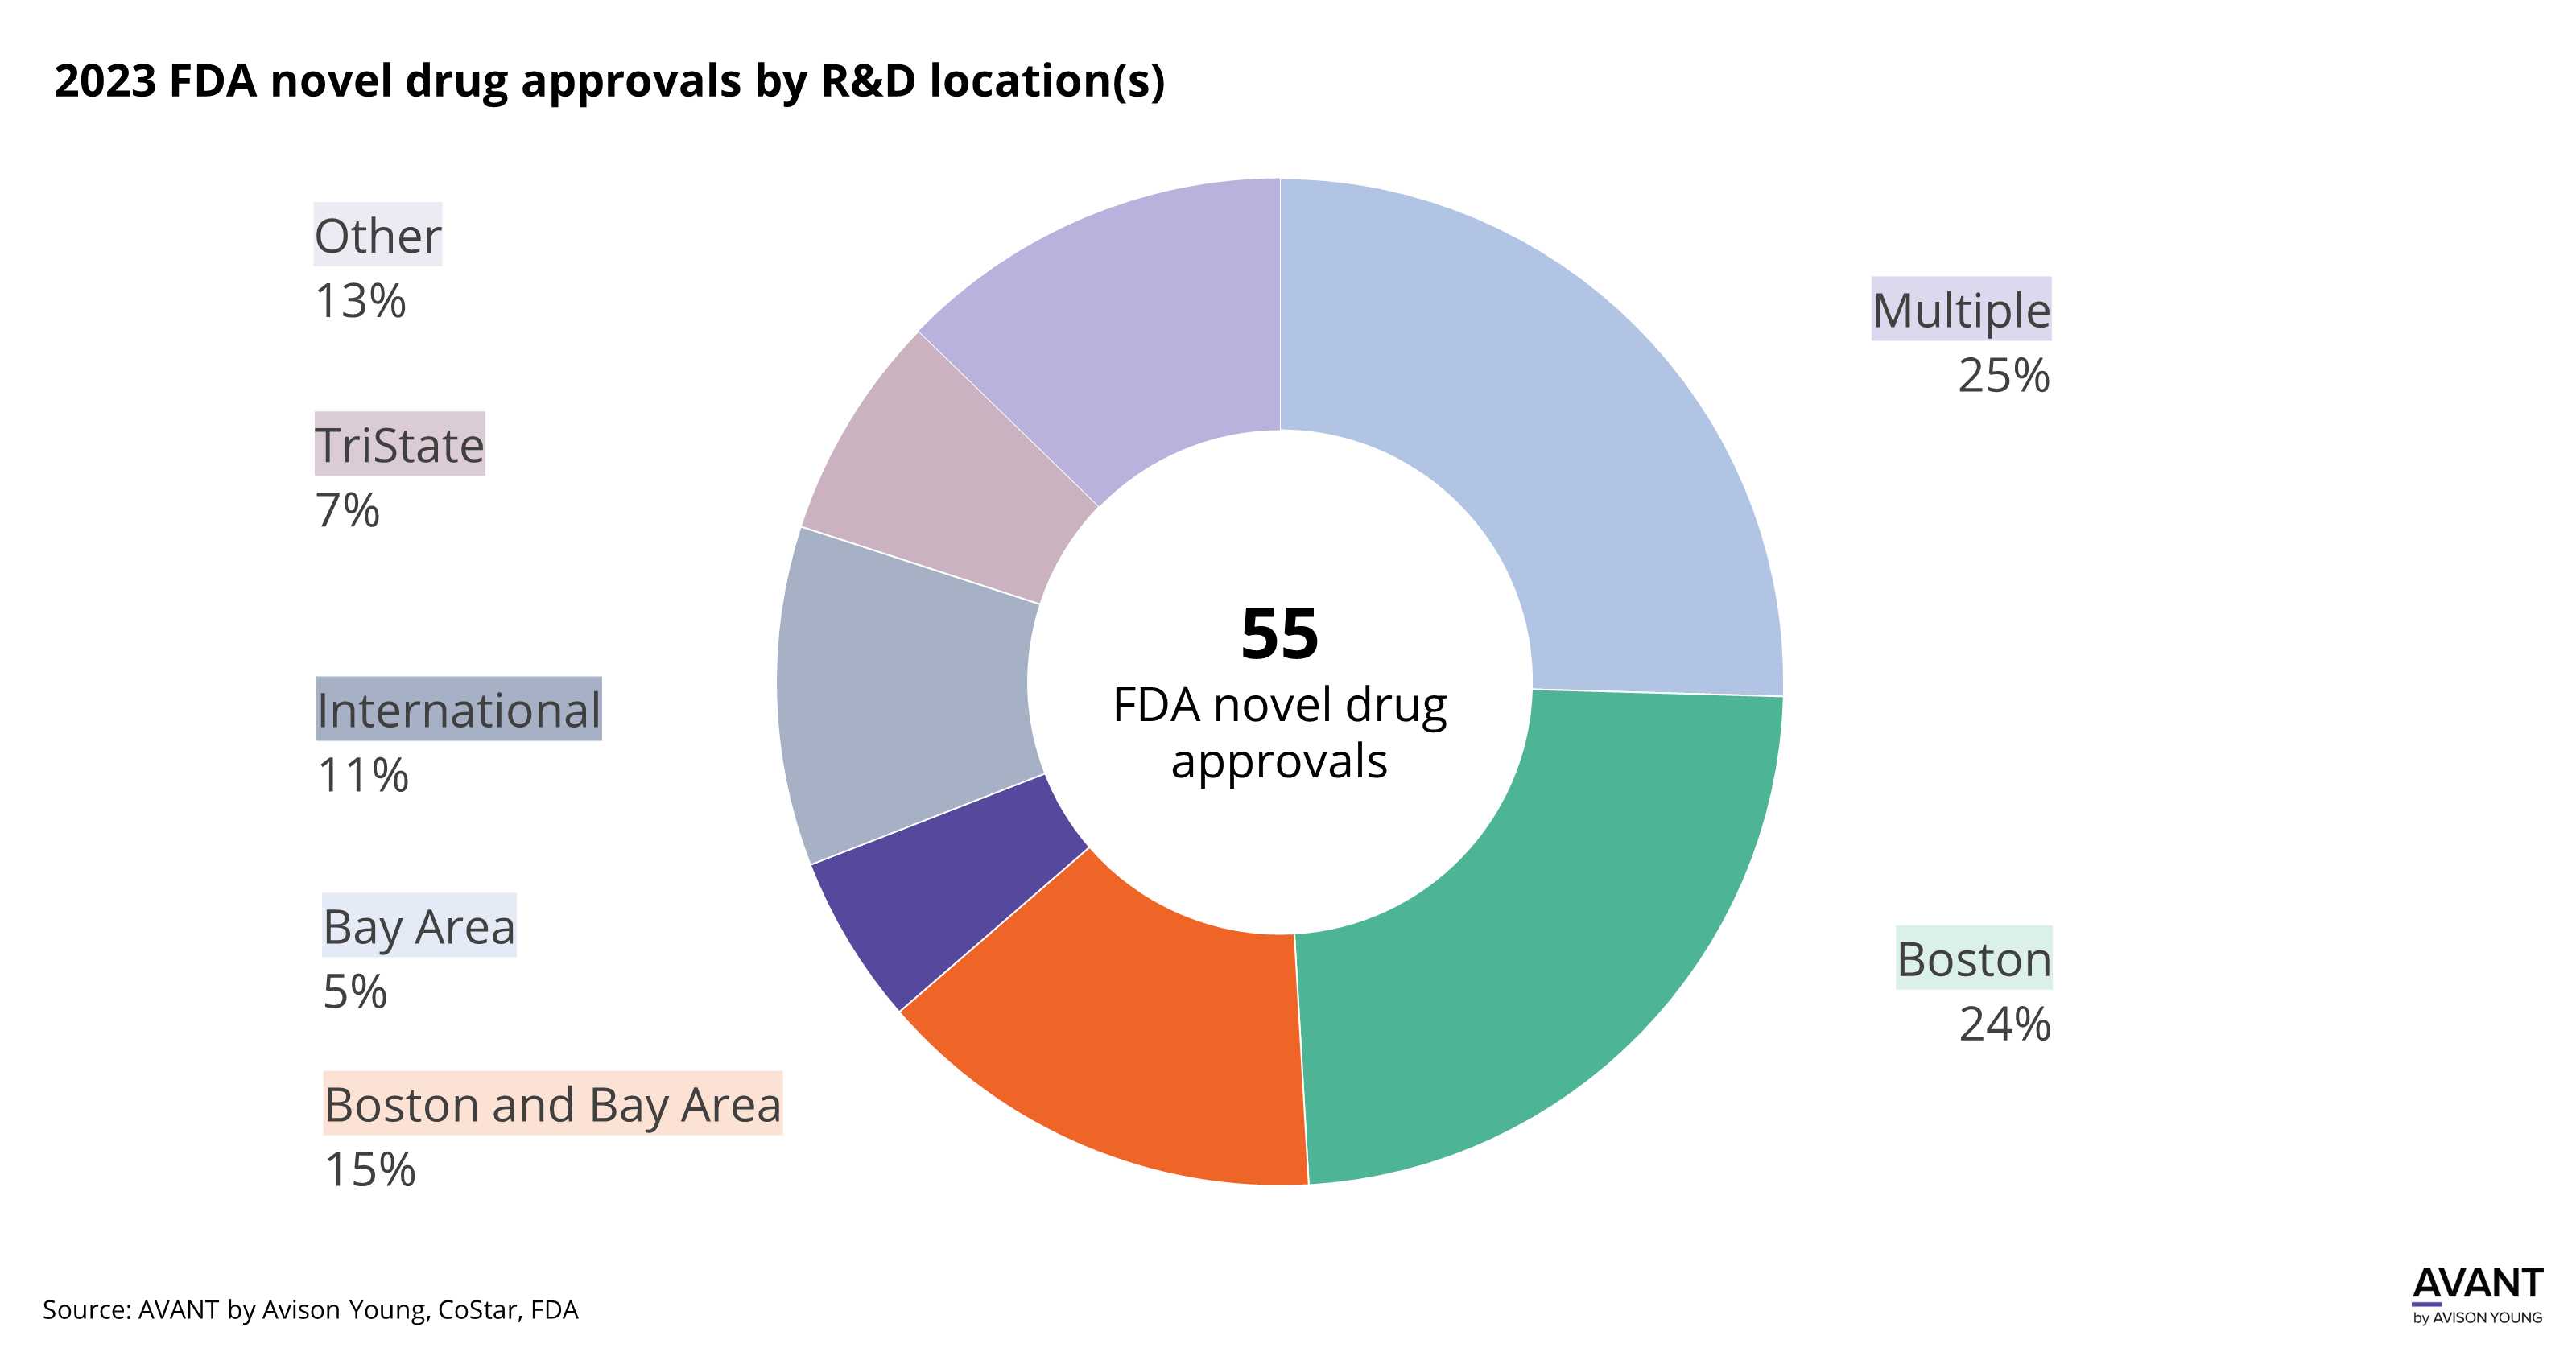 Coastal innovation: Greater Boston and Bay Area are top research hubs for novel drug approvals